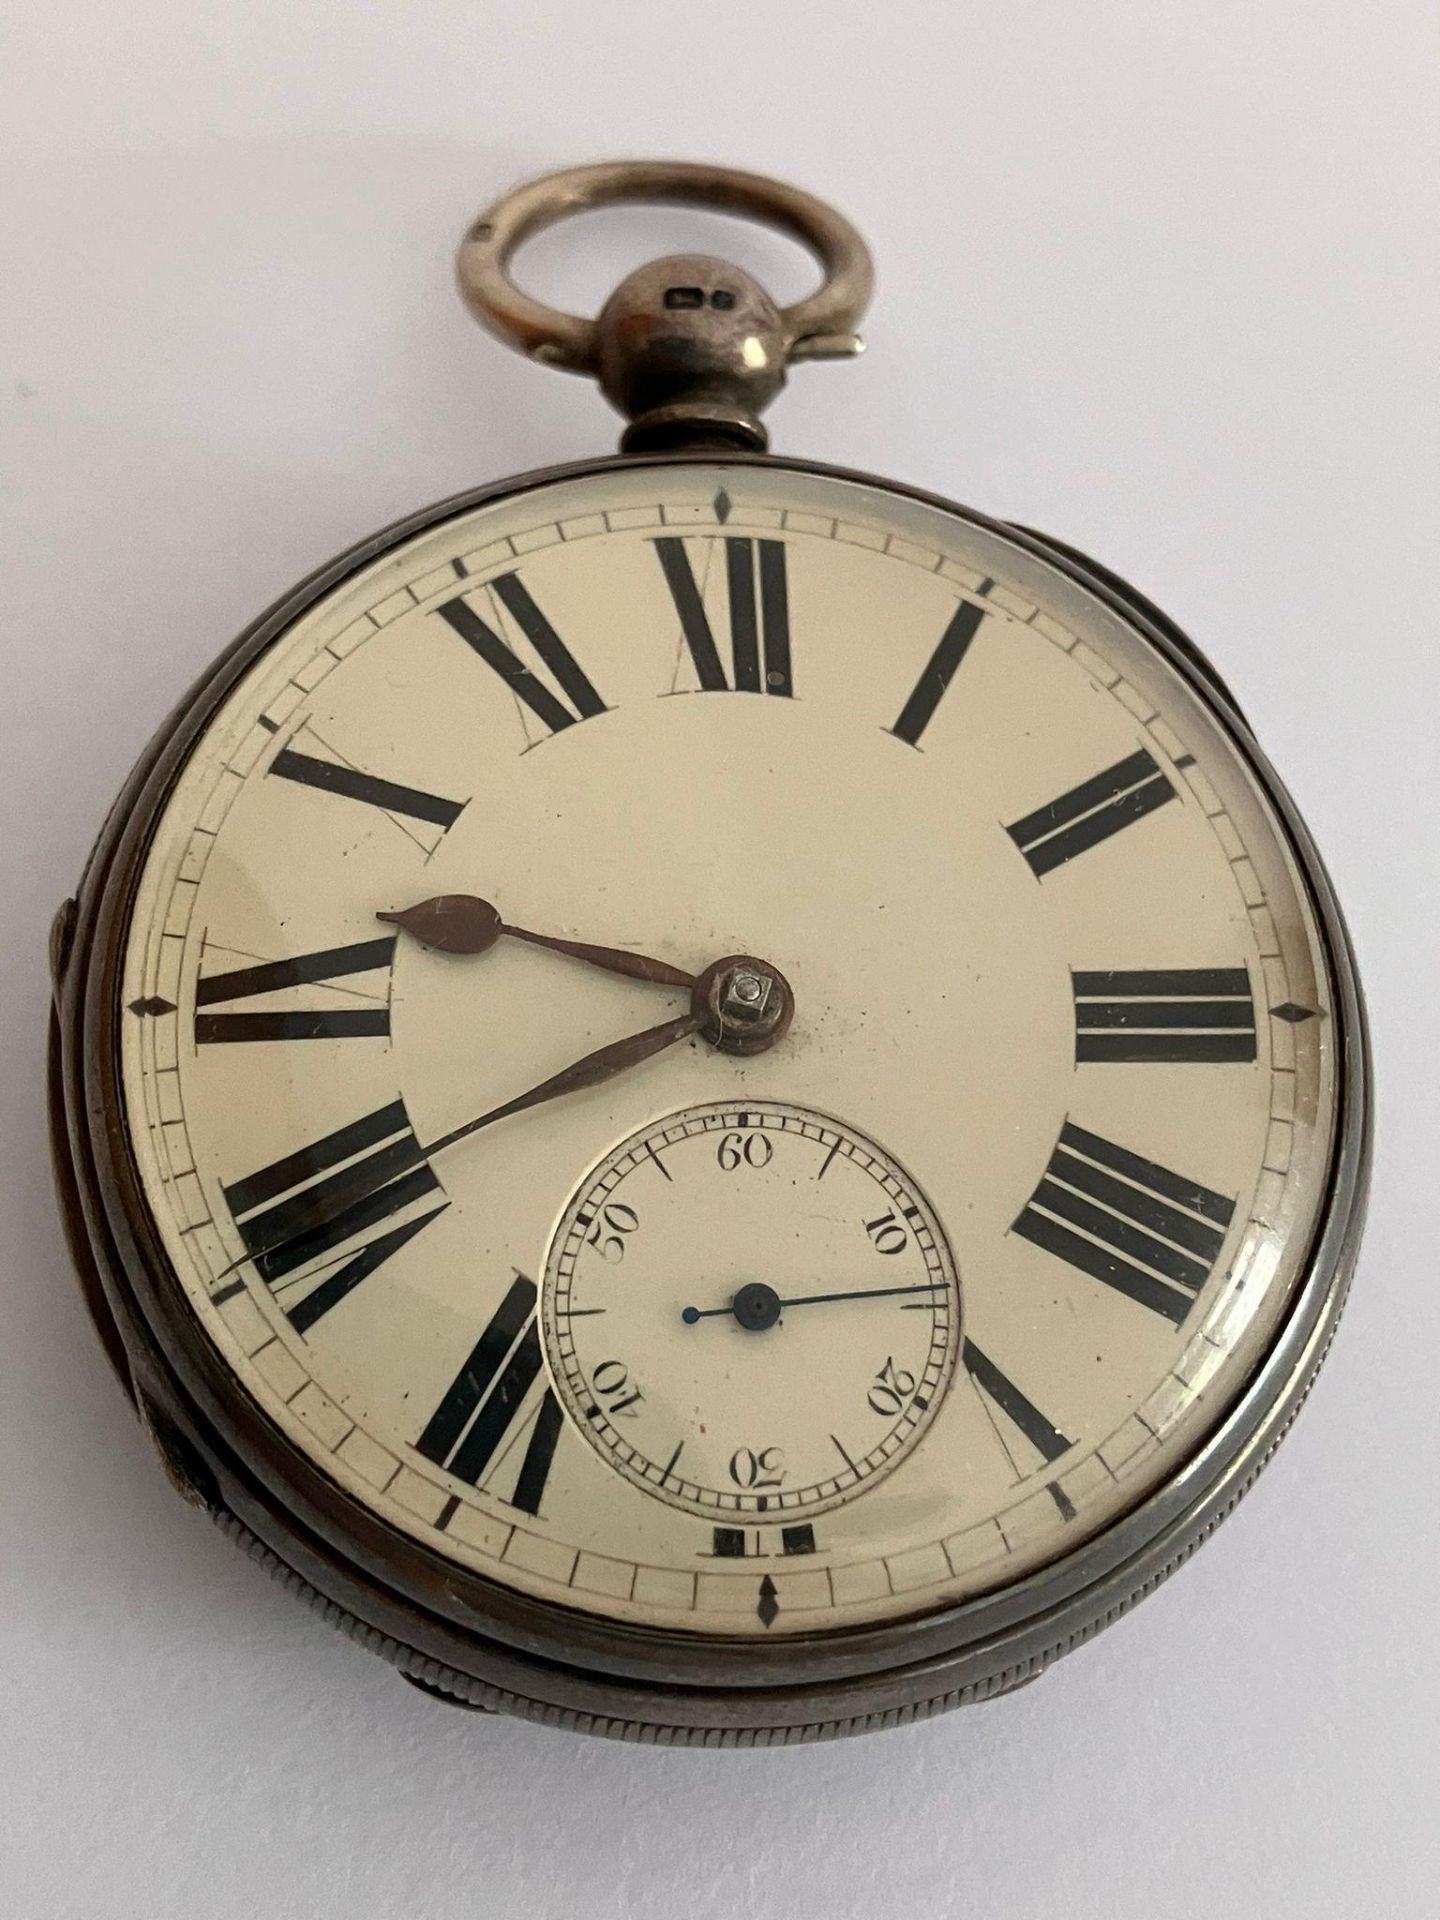 Antique SILVER POCKET WATCH with Silver Case hallmarked Robert John Pike, London 1873. Watch - Image 7 of 10